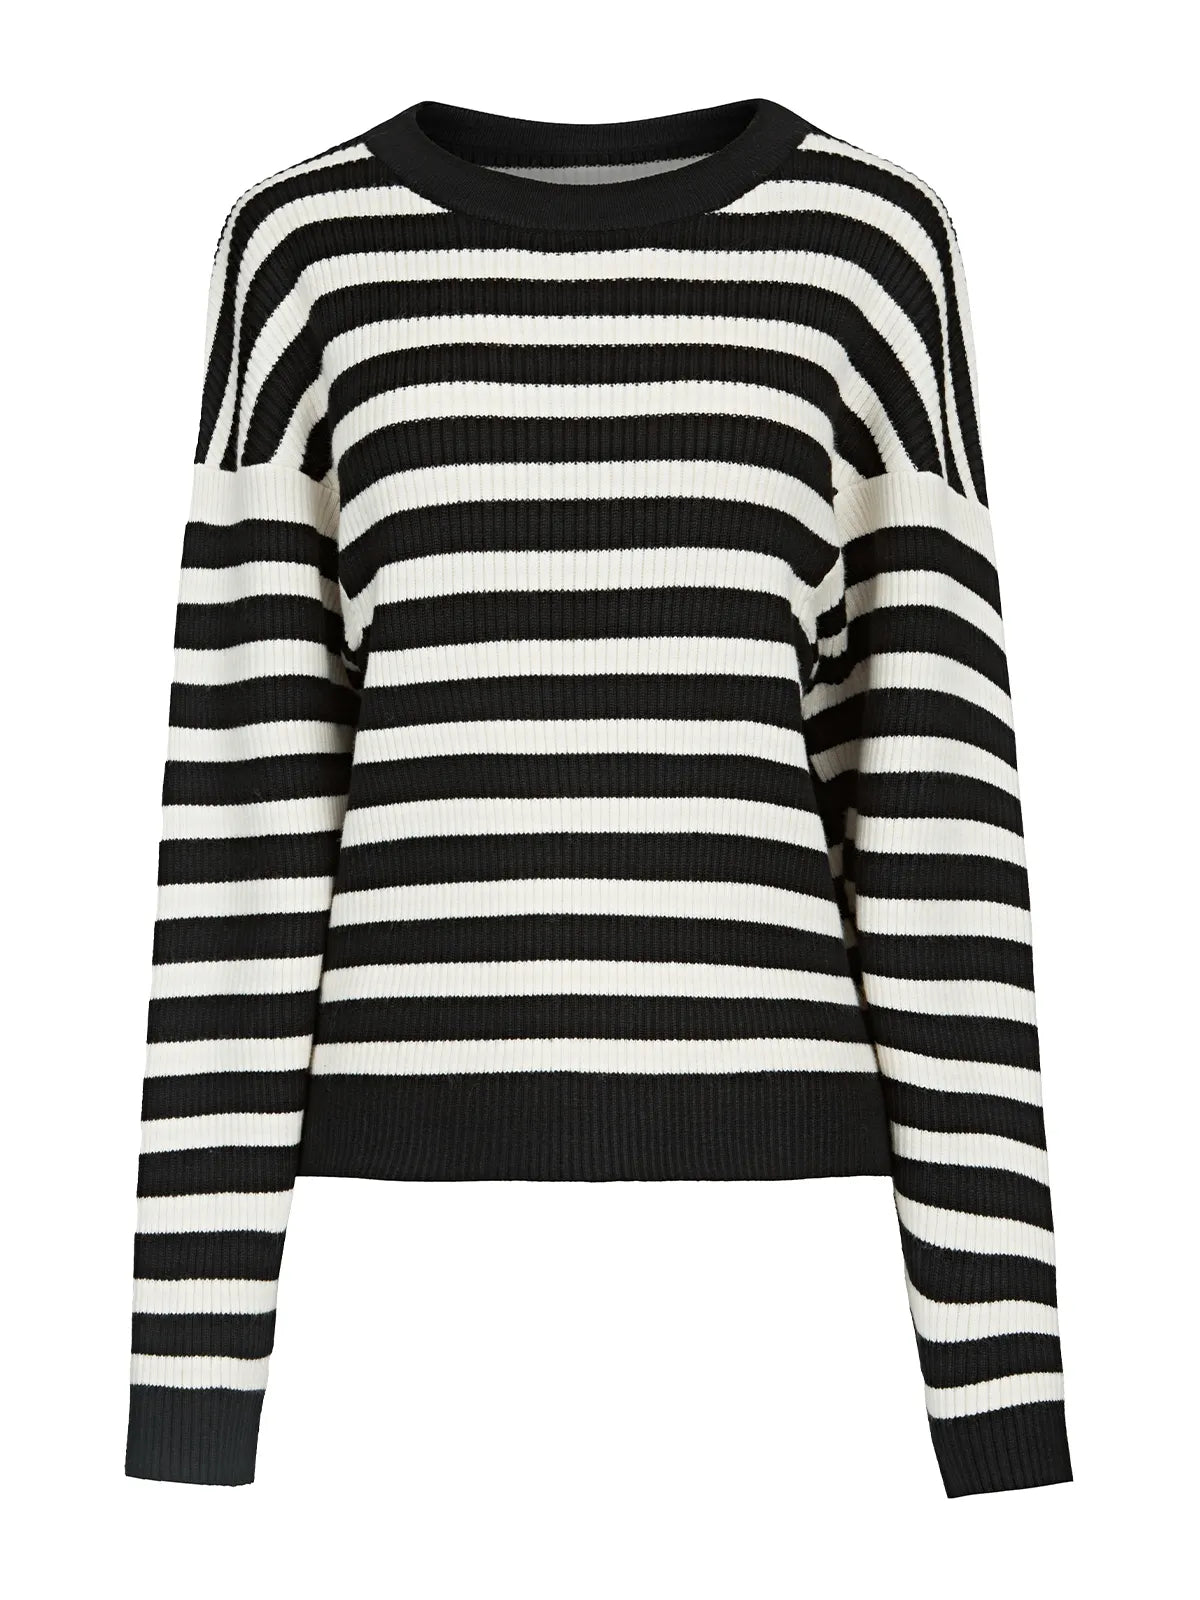 Stay on-trend with this modern ribbed sweater, complete with a round neckline and classic black and white stripes, offering a perfect balance of sophistication and contemporary style.